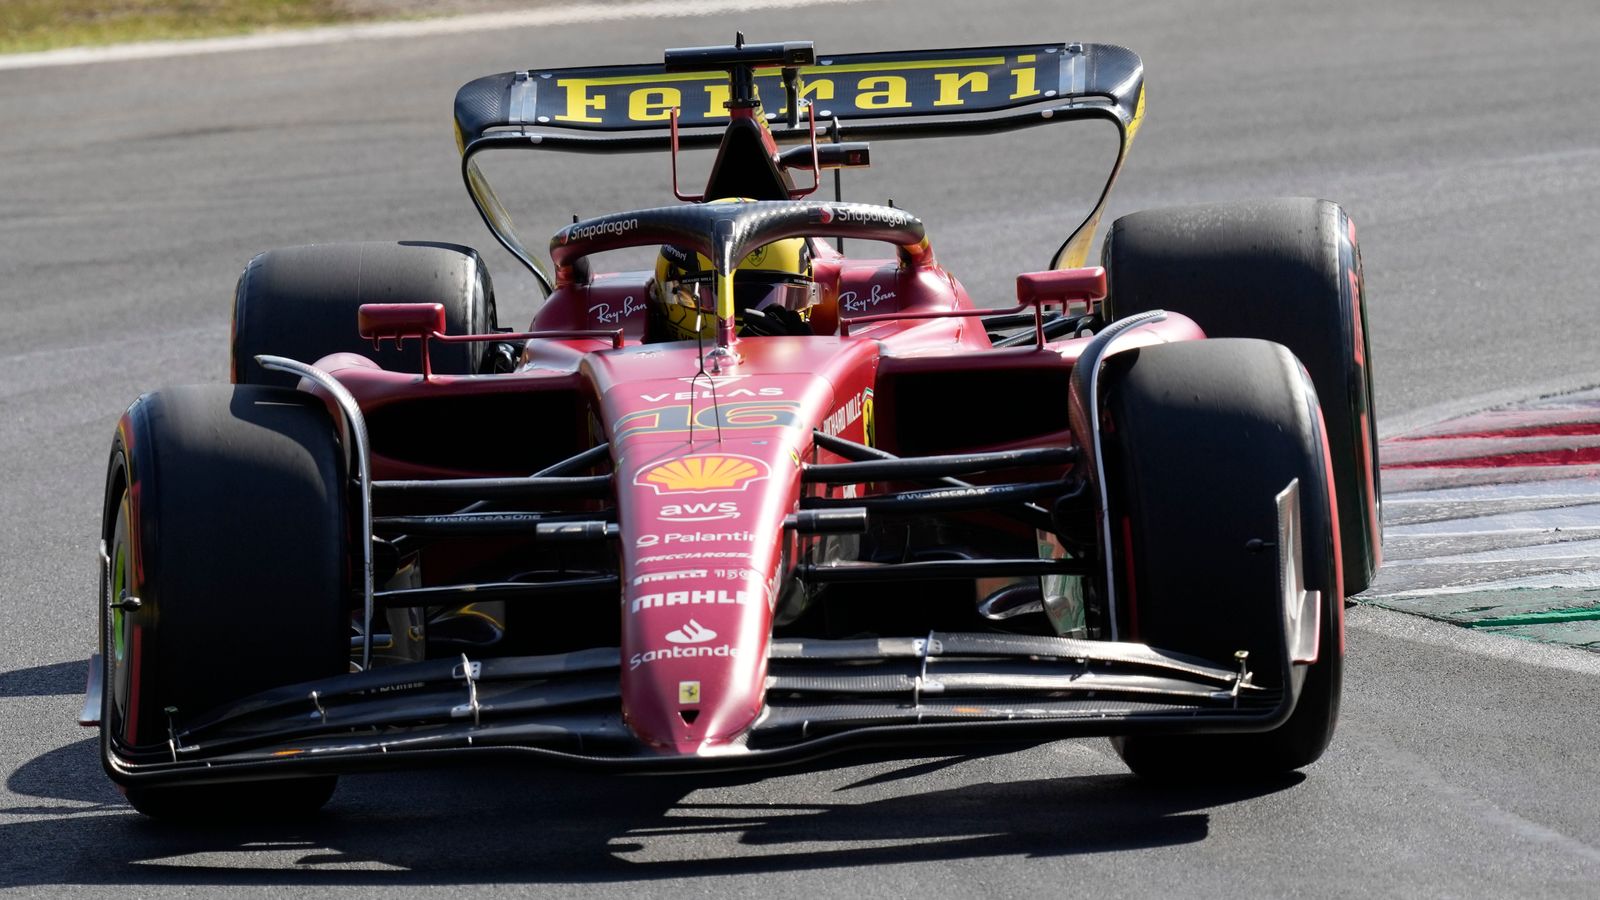 Italian GP: Charles Leclerc takes Monza pole for Ferrari as grid penalties promote George Russell to front row